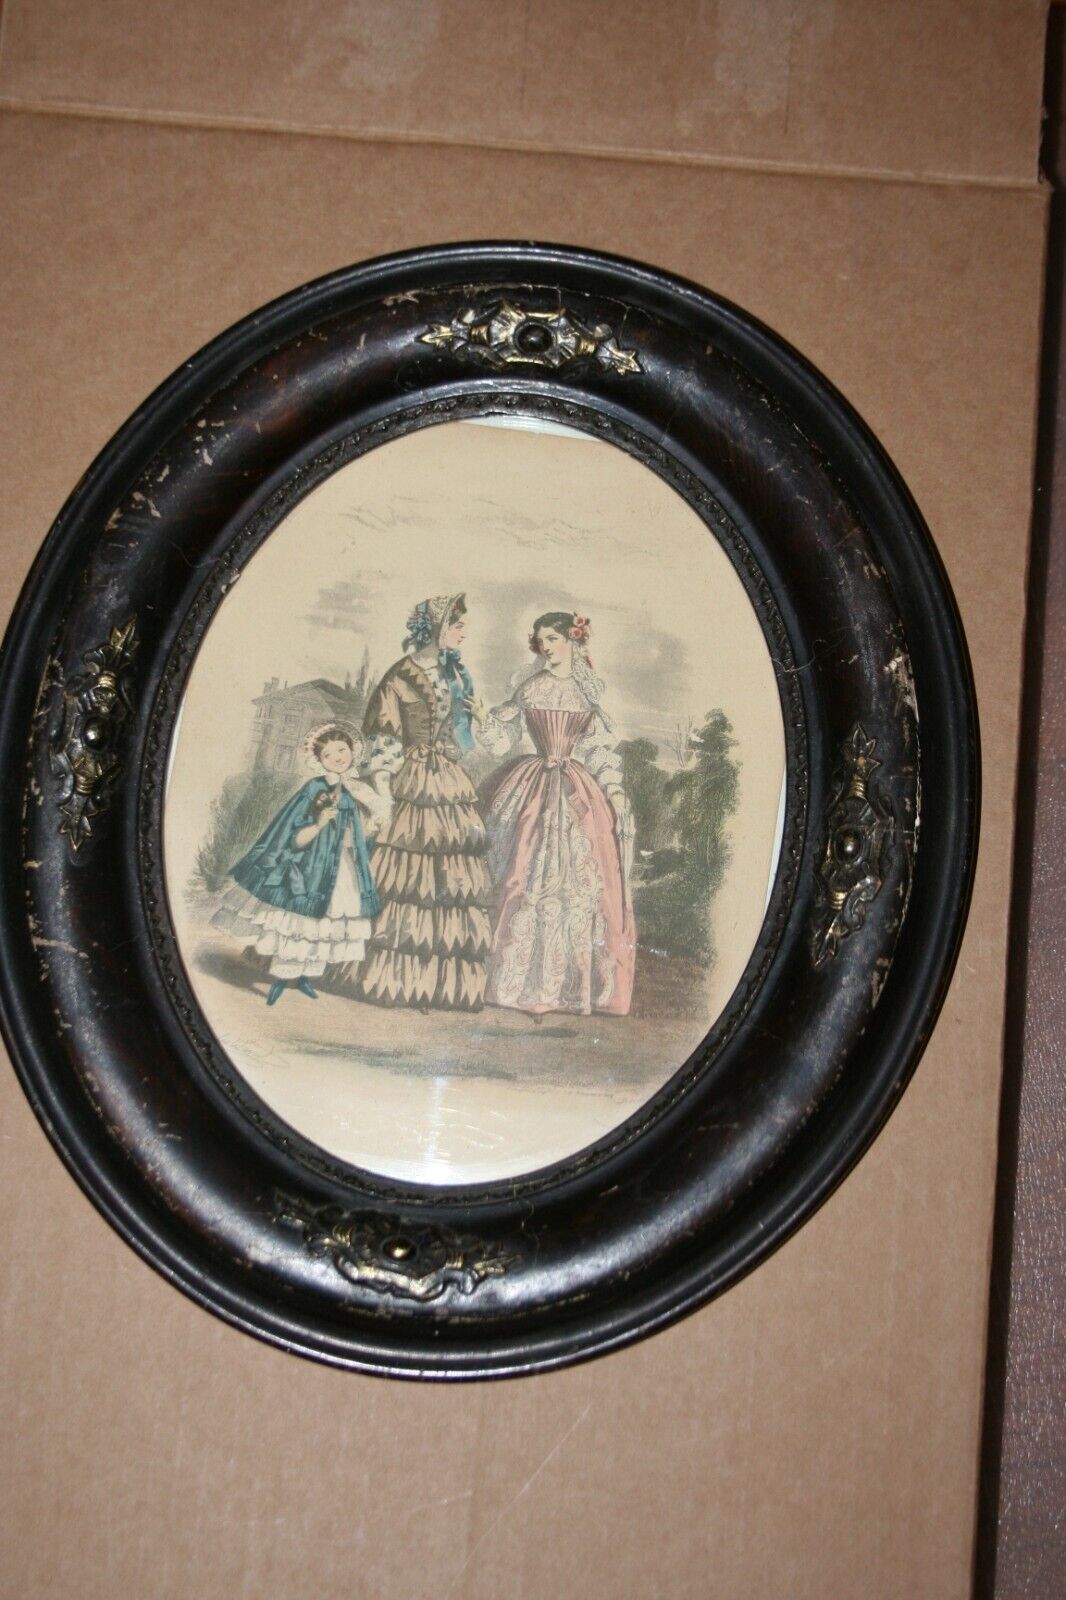 Antique embellished  wooden(walnut?) Oval frame with French Fashion Print